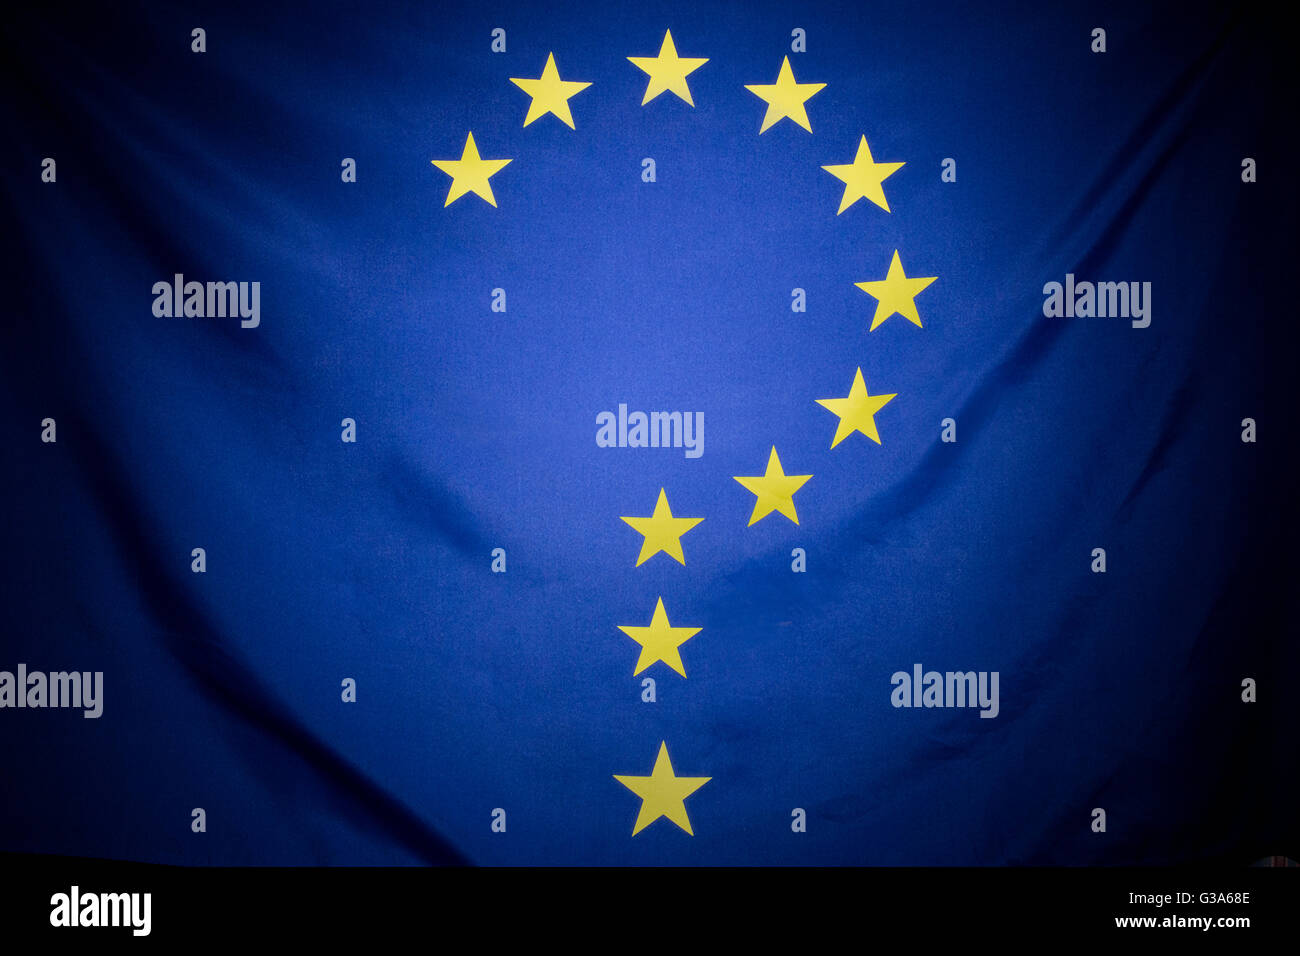 A large EU flag edited into the shape of a question mark, symbolizing a decision or choice concerning Europe. Stock Photo